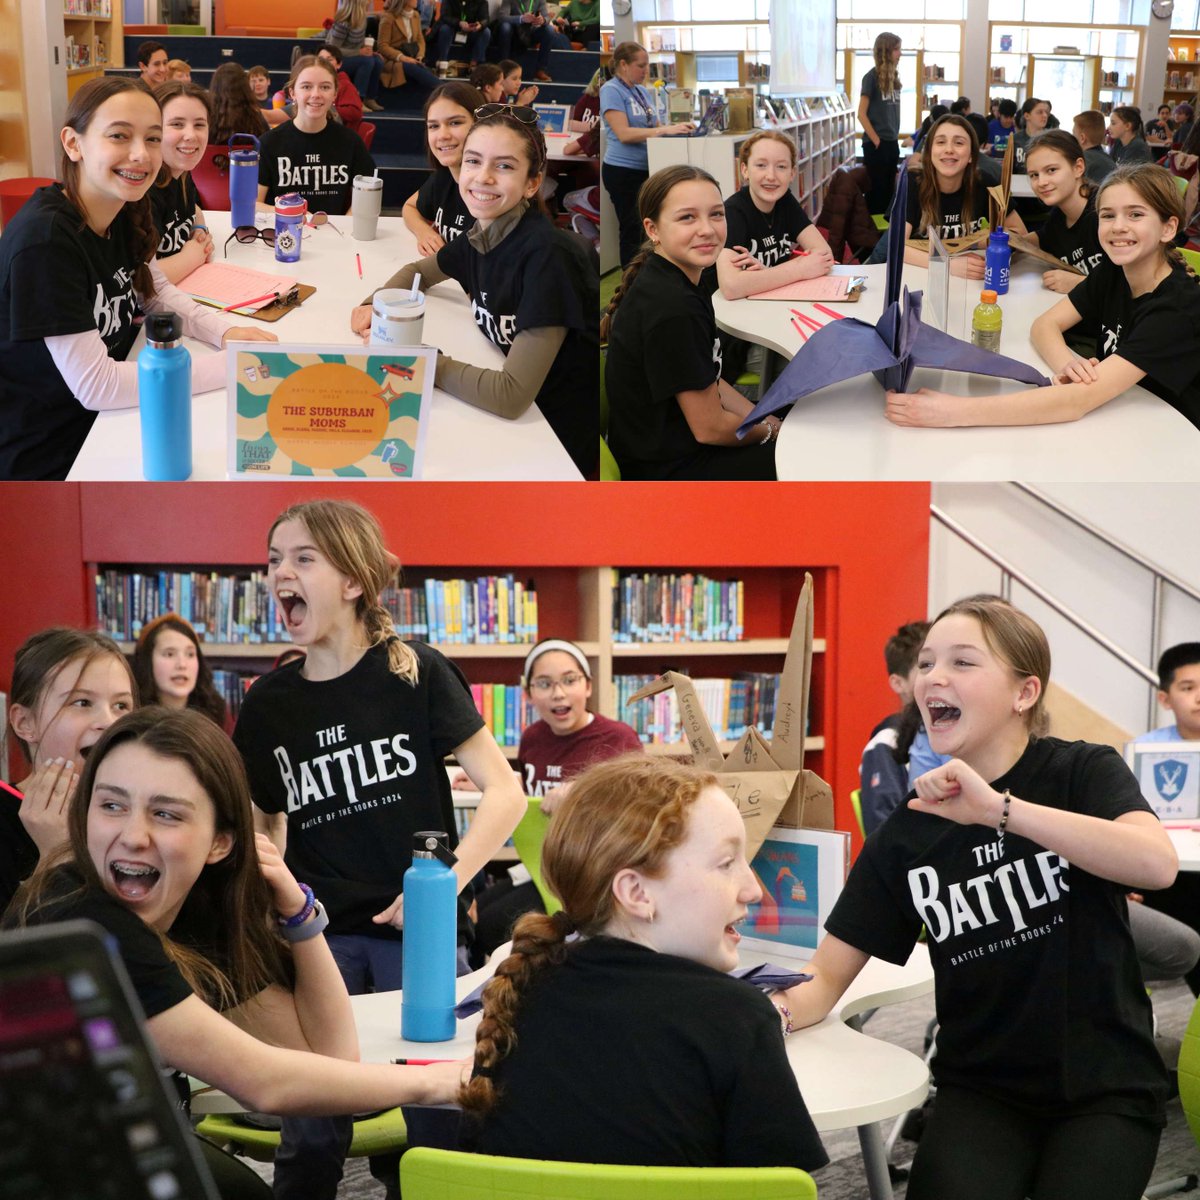 Our Battle of the Books coverage wouldn't be complete without a shoutout to The Paper Swans and The Suburban Moms for an excellent showing at the Middle School Championships in Pleasantdale! Great job, Tigers! #gurriepride